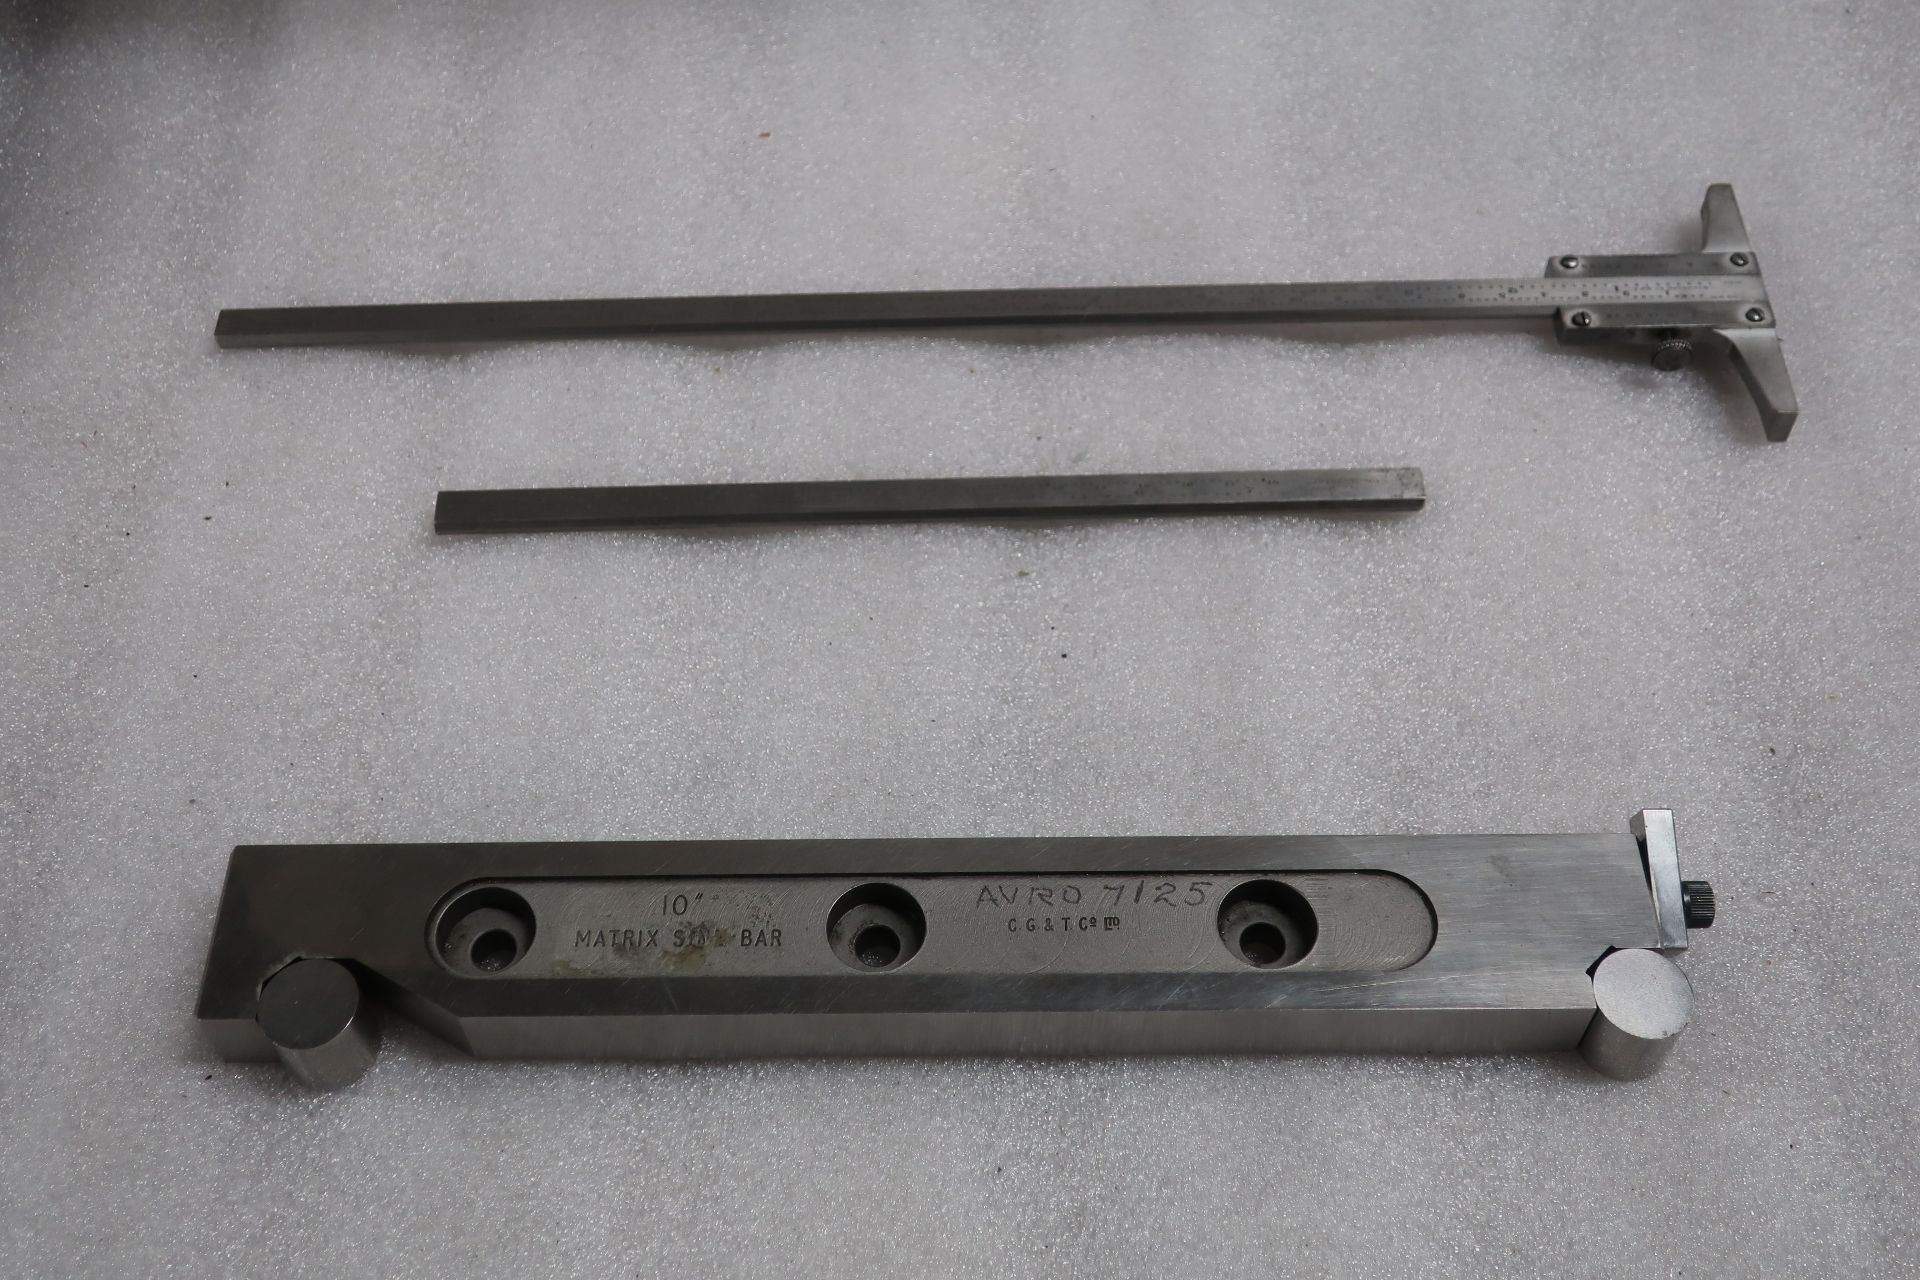 Lot of 2 (2 units) Starrett Large Micrometers 30-36" sets with attachments as pictured - Image 2 of 2